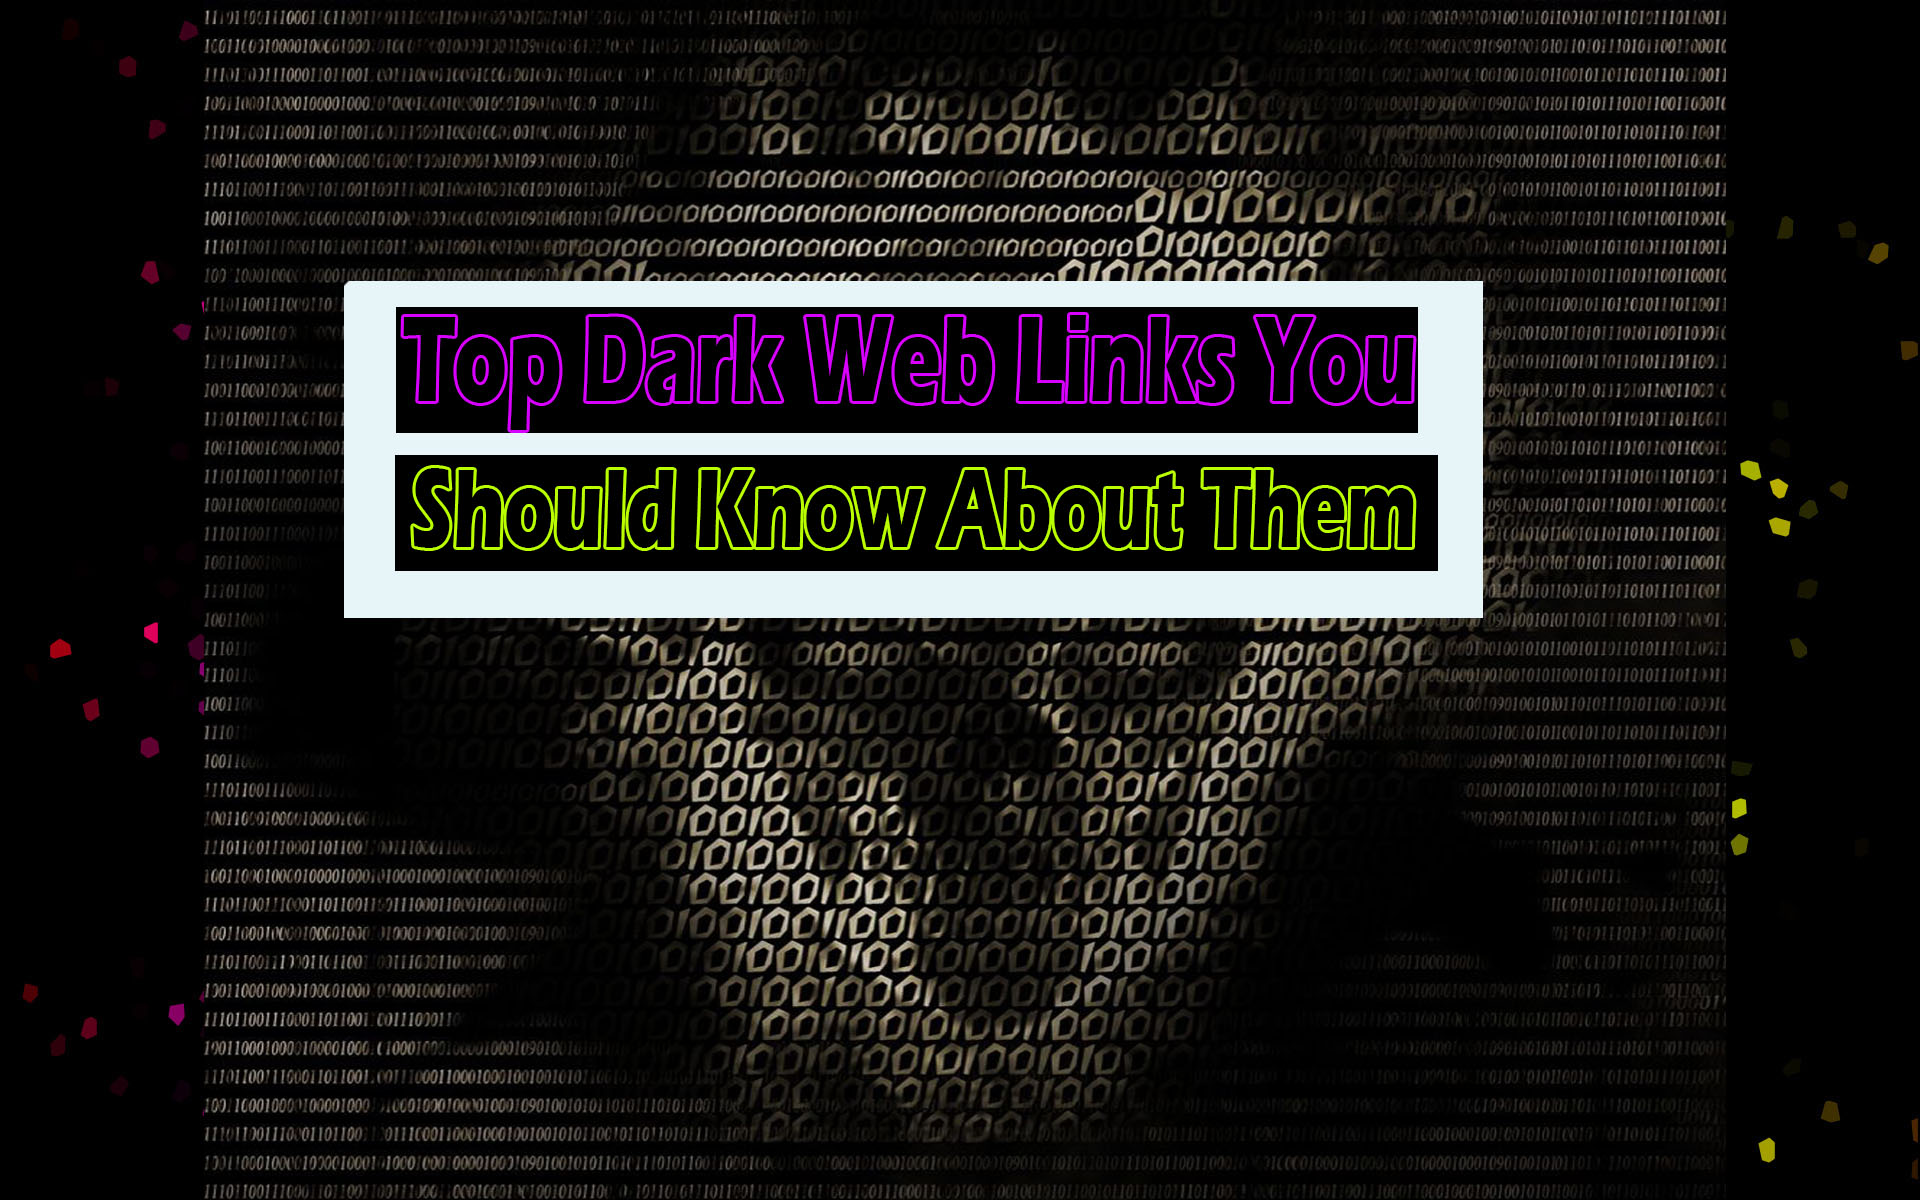 Top Dark Web Links You Should Know About Them